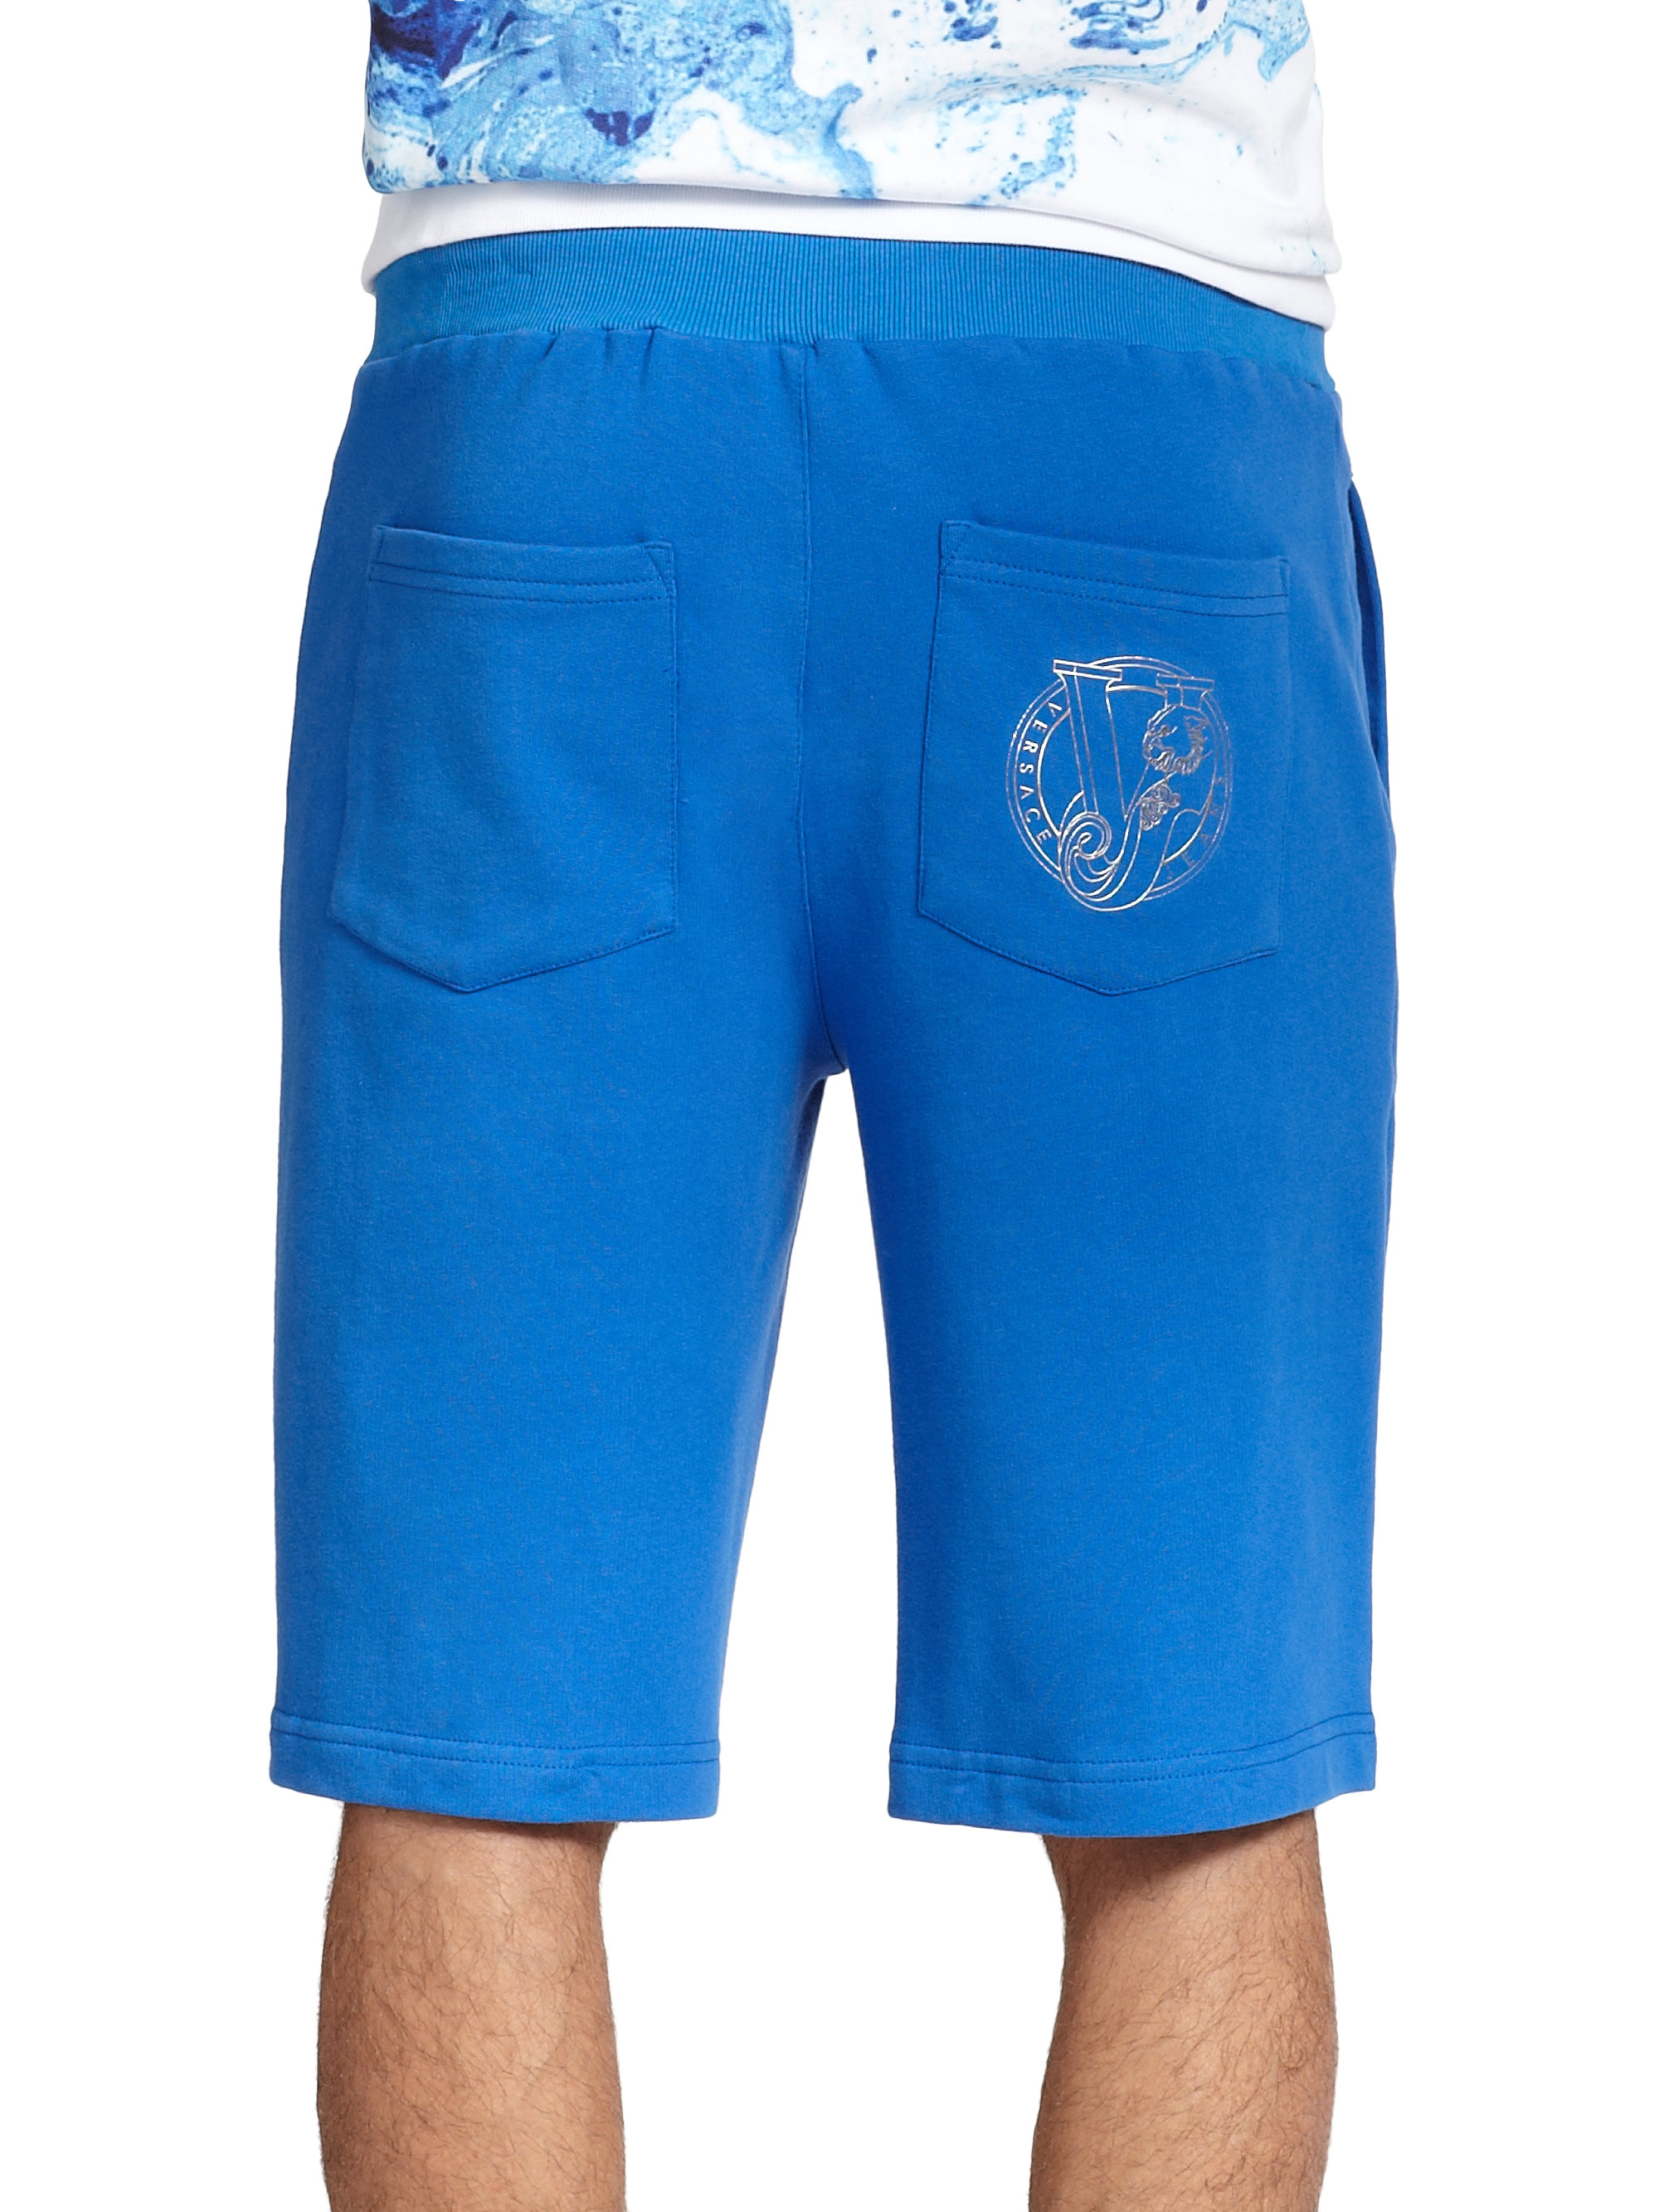 Lyst - Versace Jeans Solid Sweat Shorts in Blue for Men